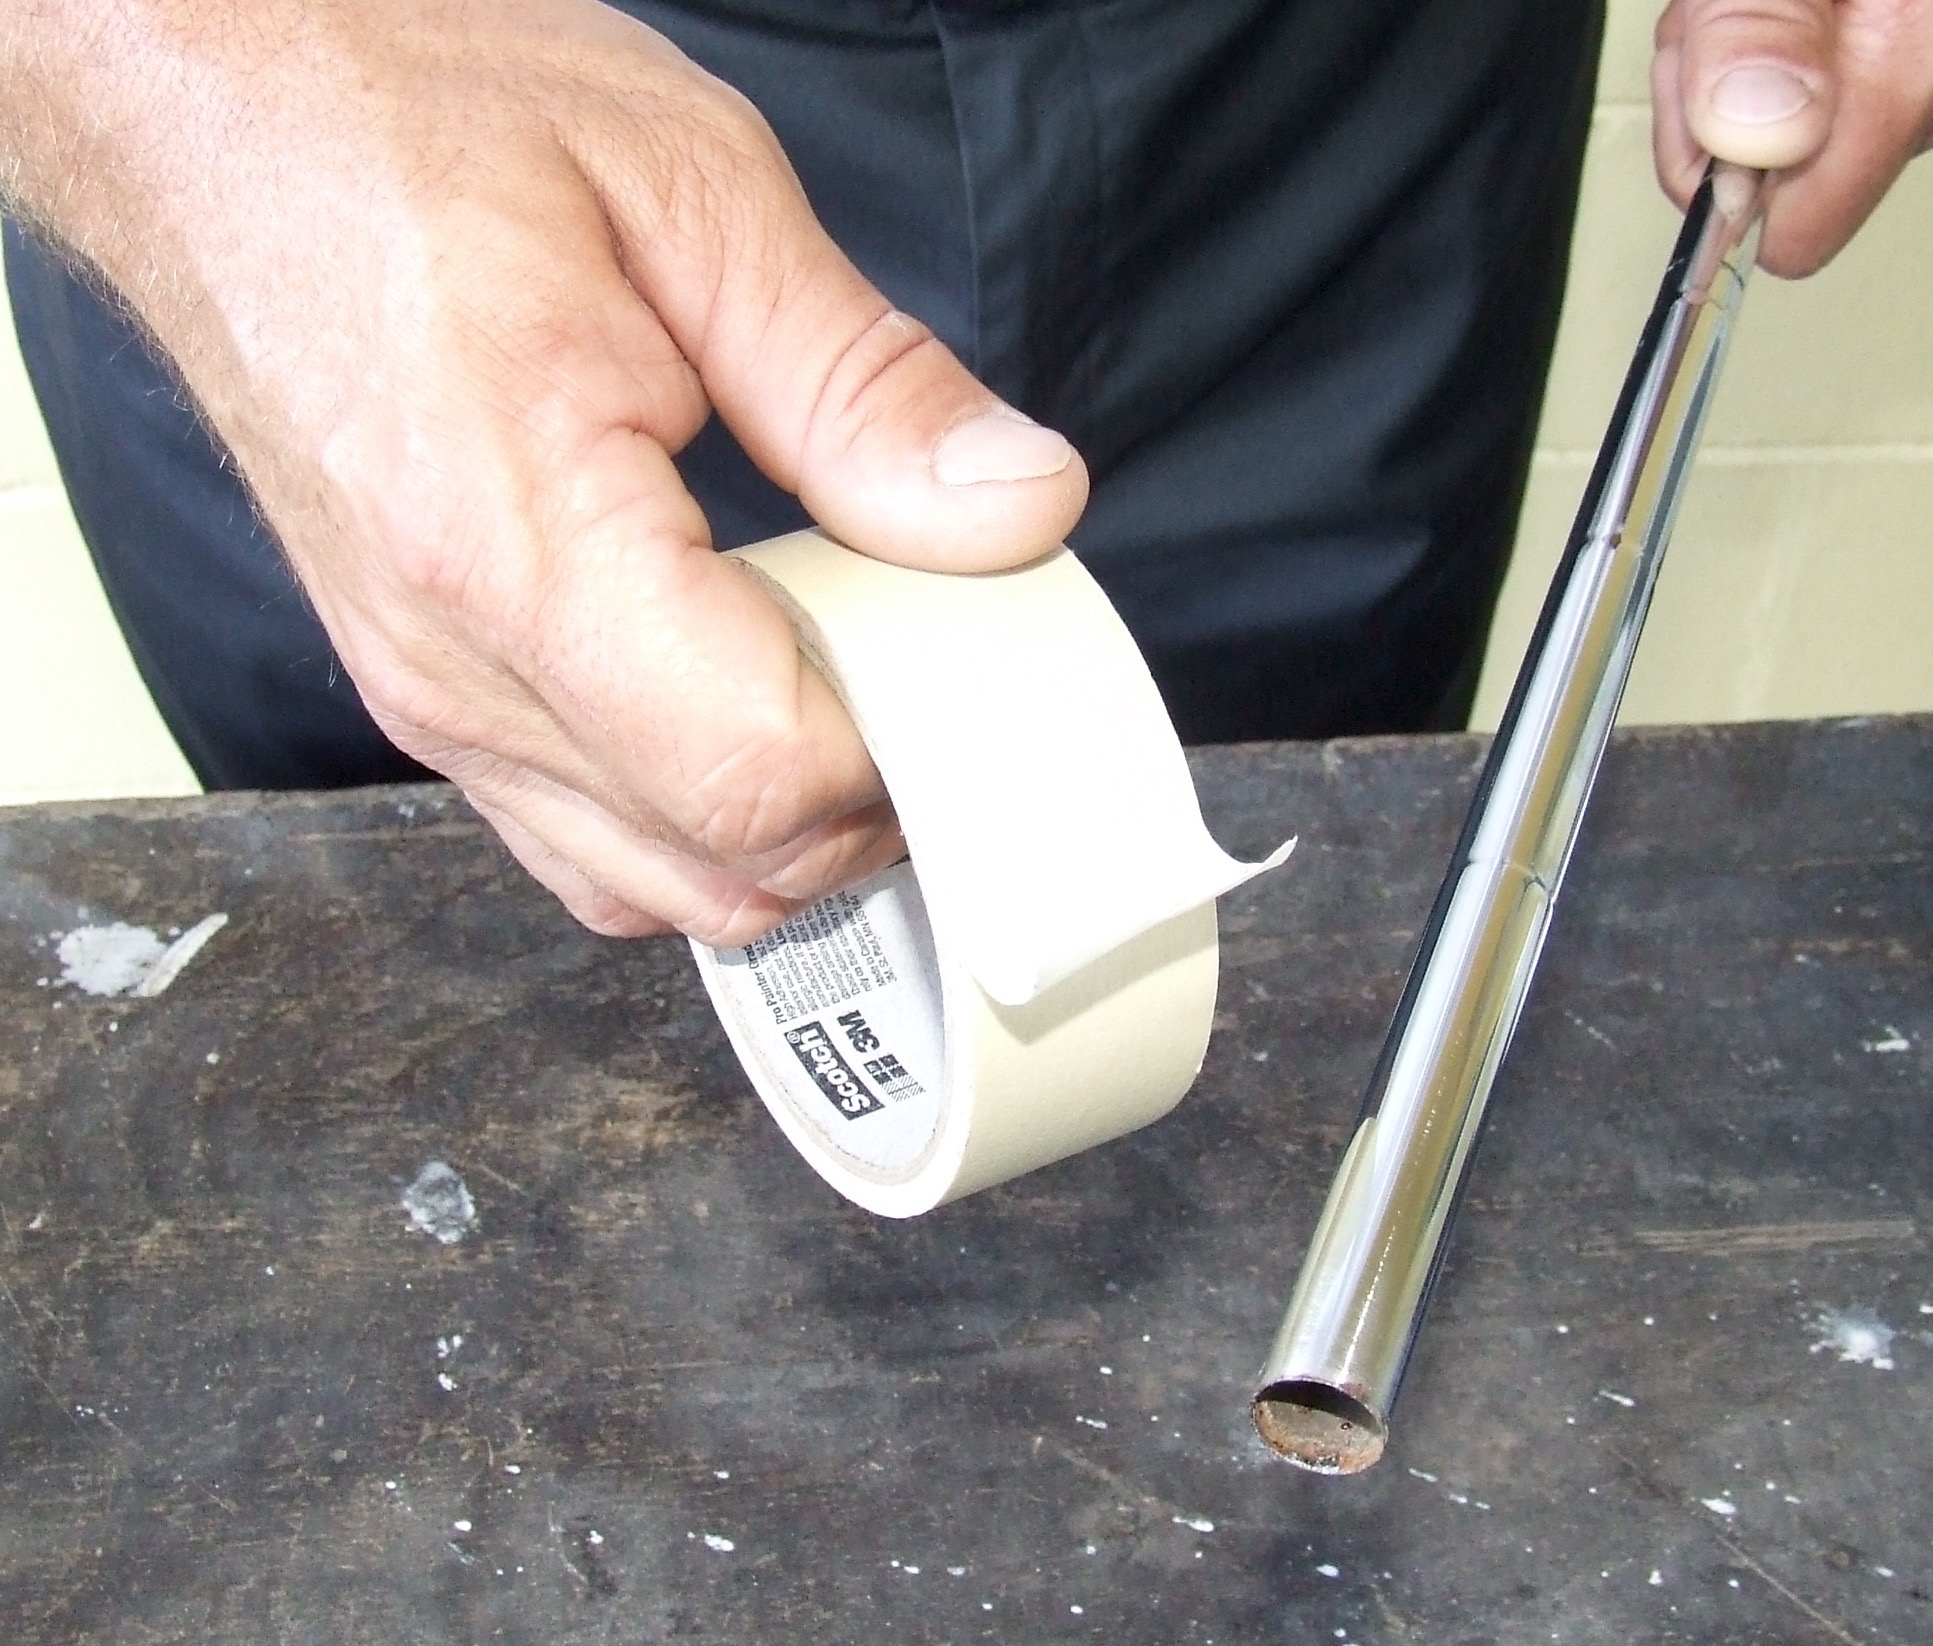 Add extra masking tape to the putter shaft